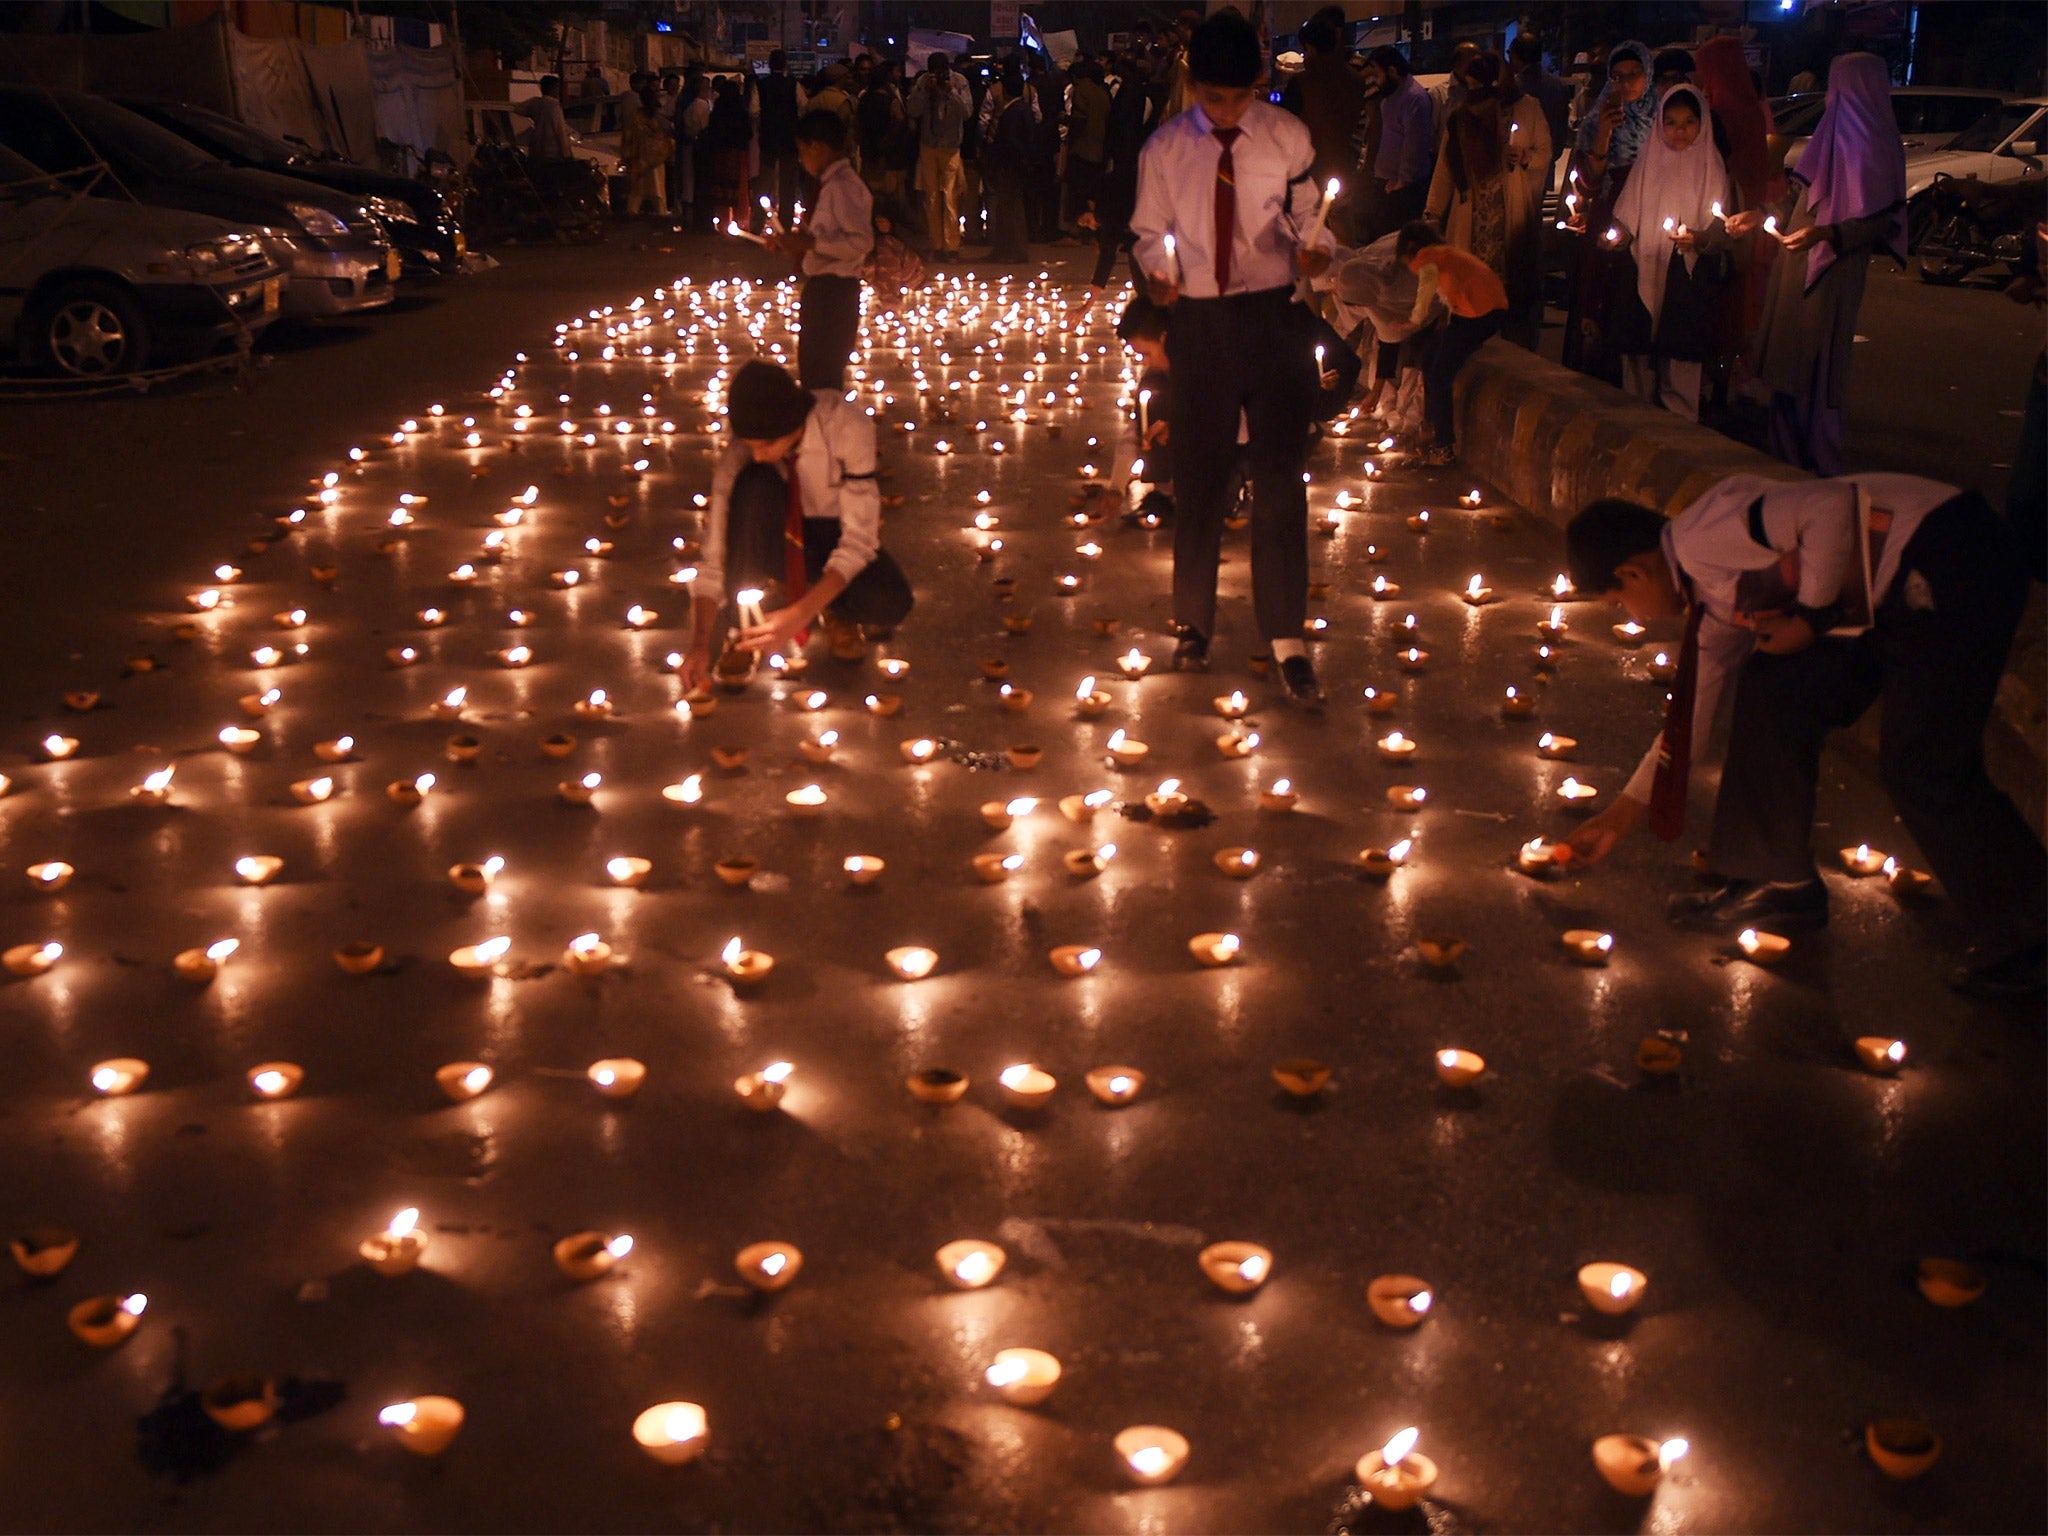 Pakistani students in Karachi light earthen lamps for the victims of the attack in Peshawar